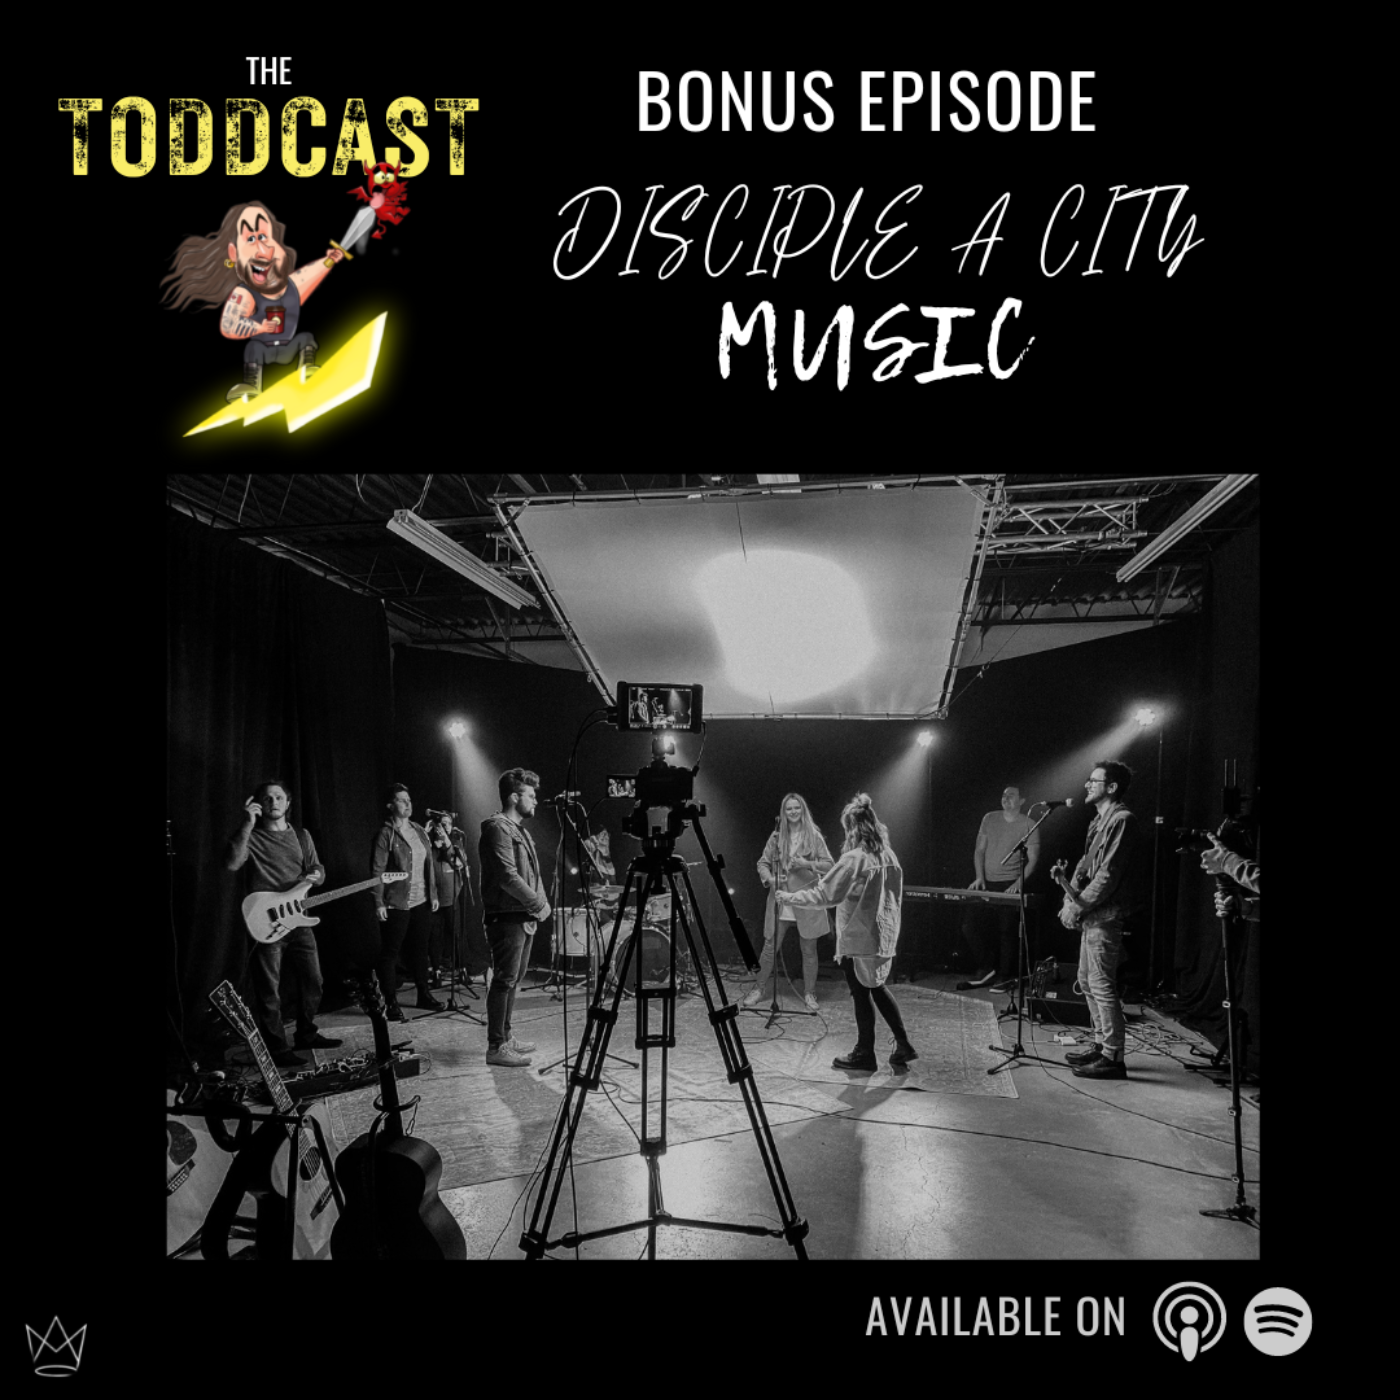 The Toddcast - Disciple A City Music